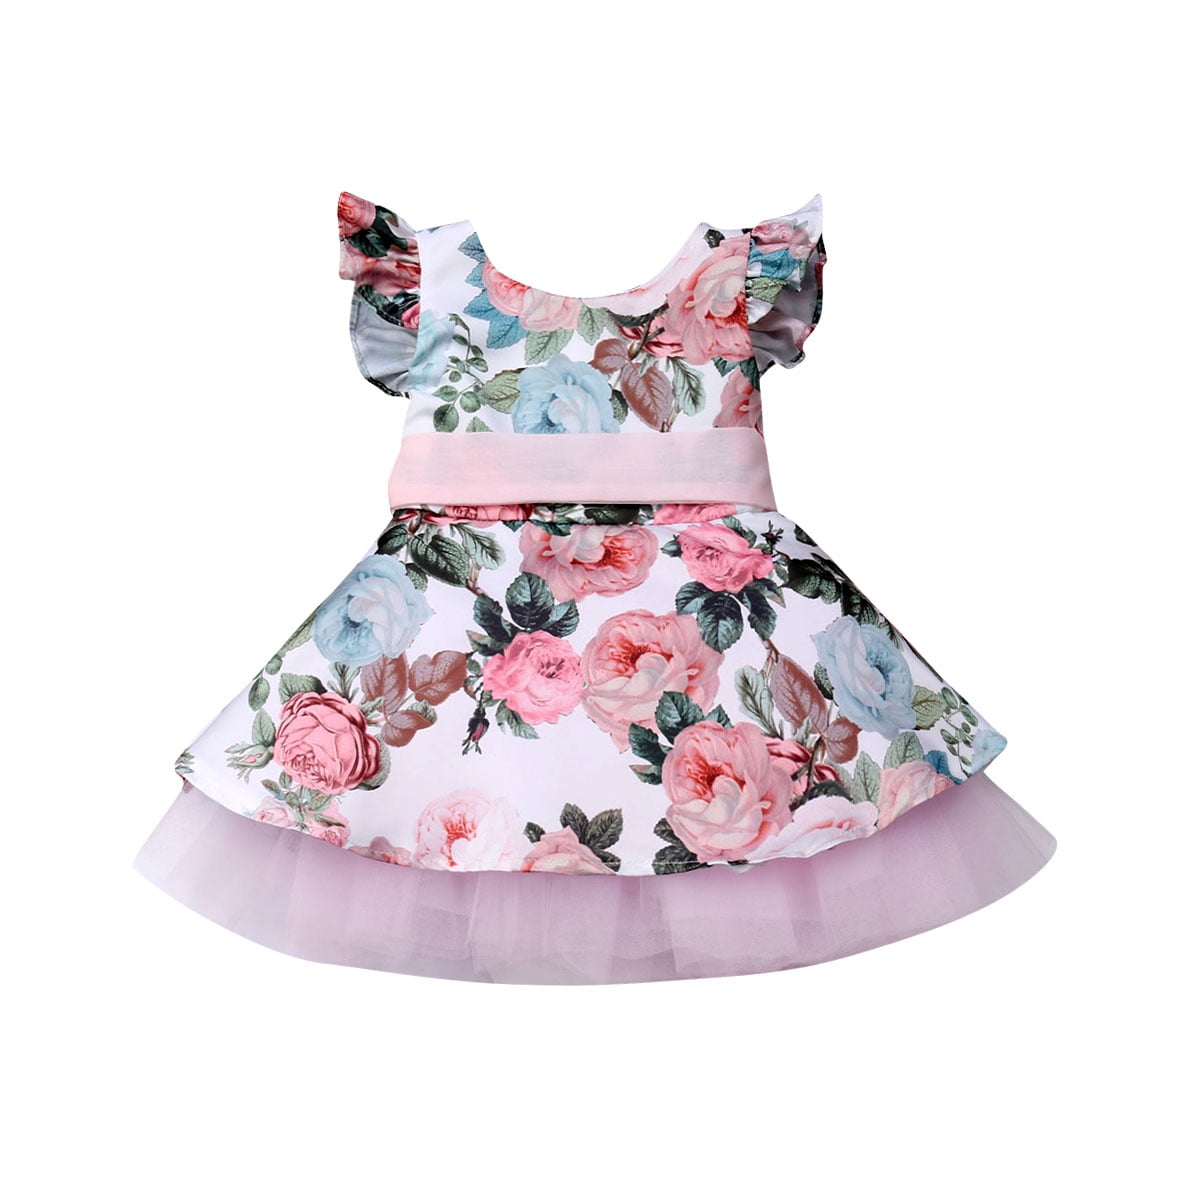 Toddler Baby Girls Ruffles Fly Sleeve Floral Print Party Princess Dress Clothes 